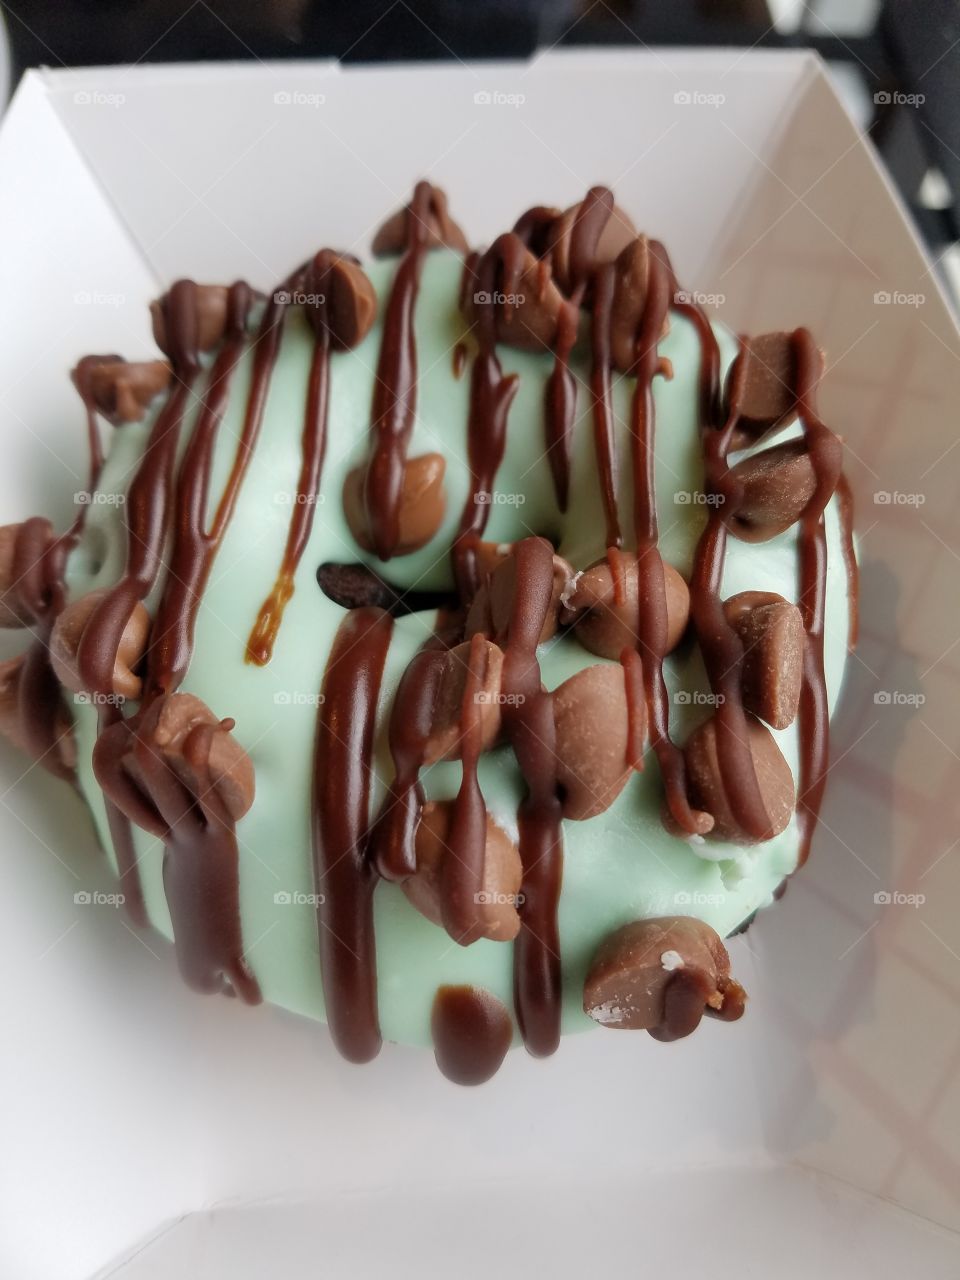 Mint Chocolate Chip Donut at Doughology